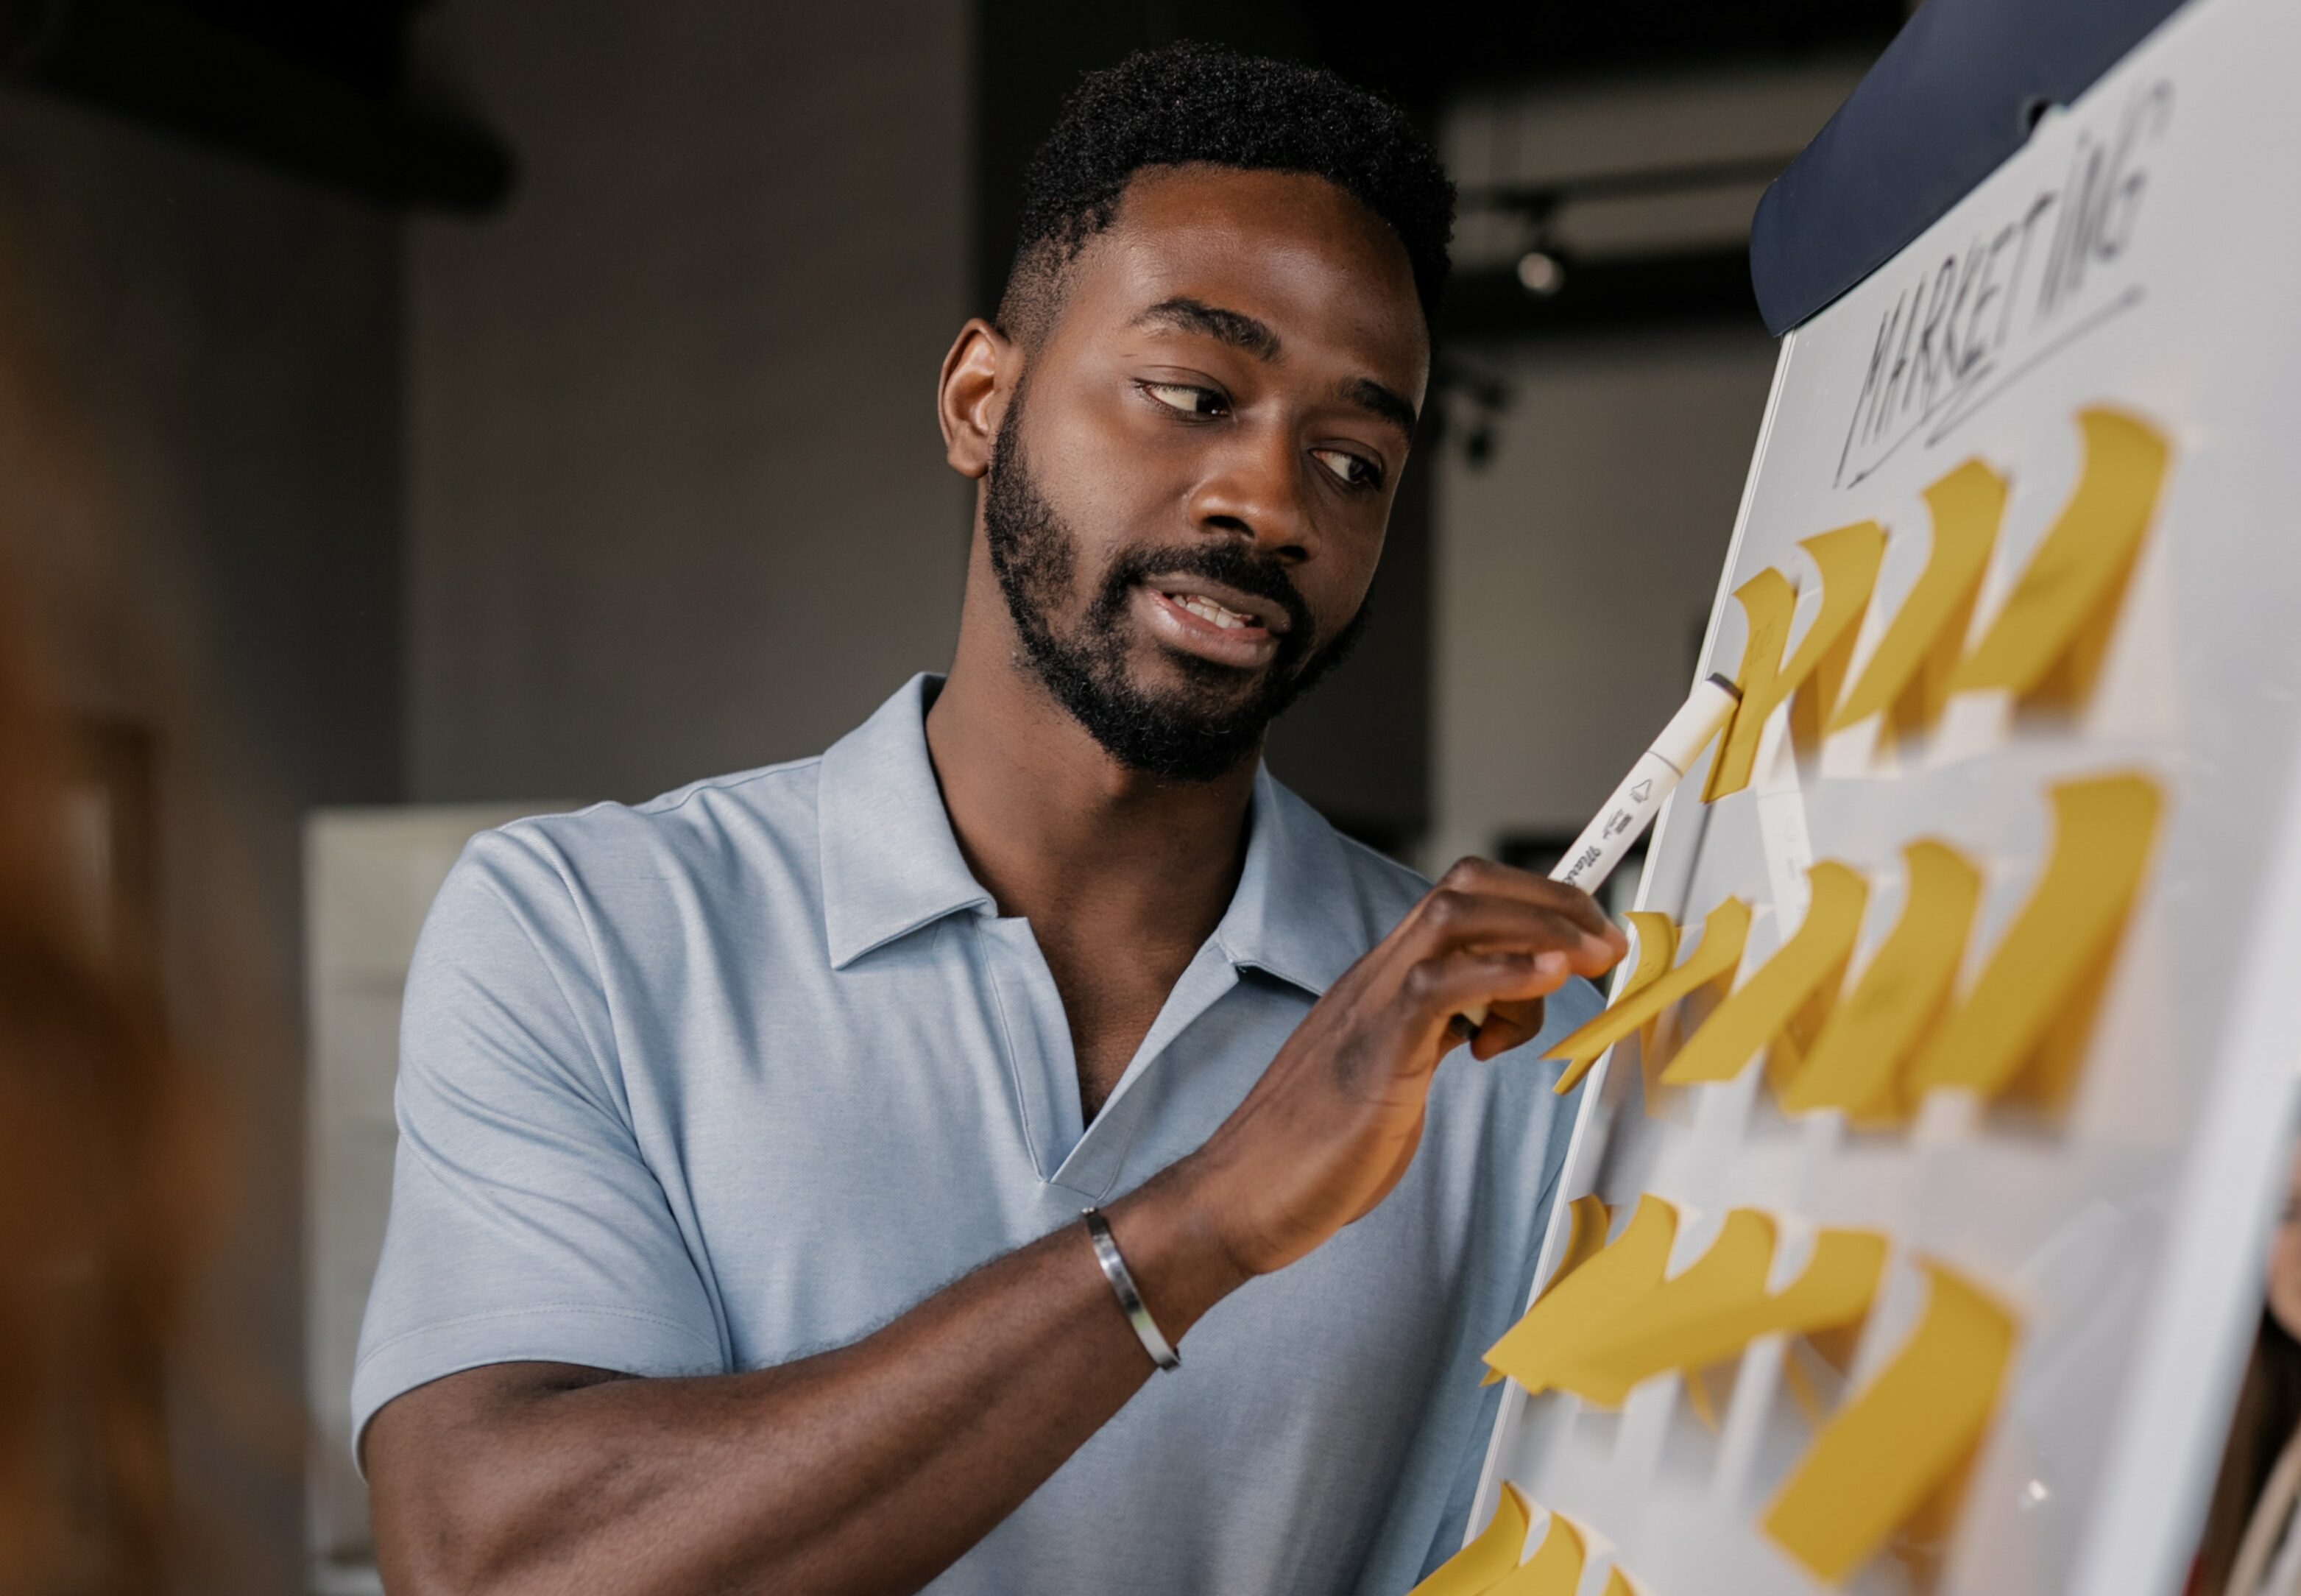 A man sticks post-it notes to a white board to understand his business marketing strategy